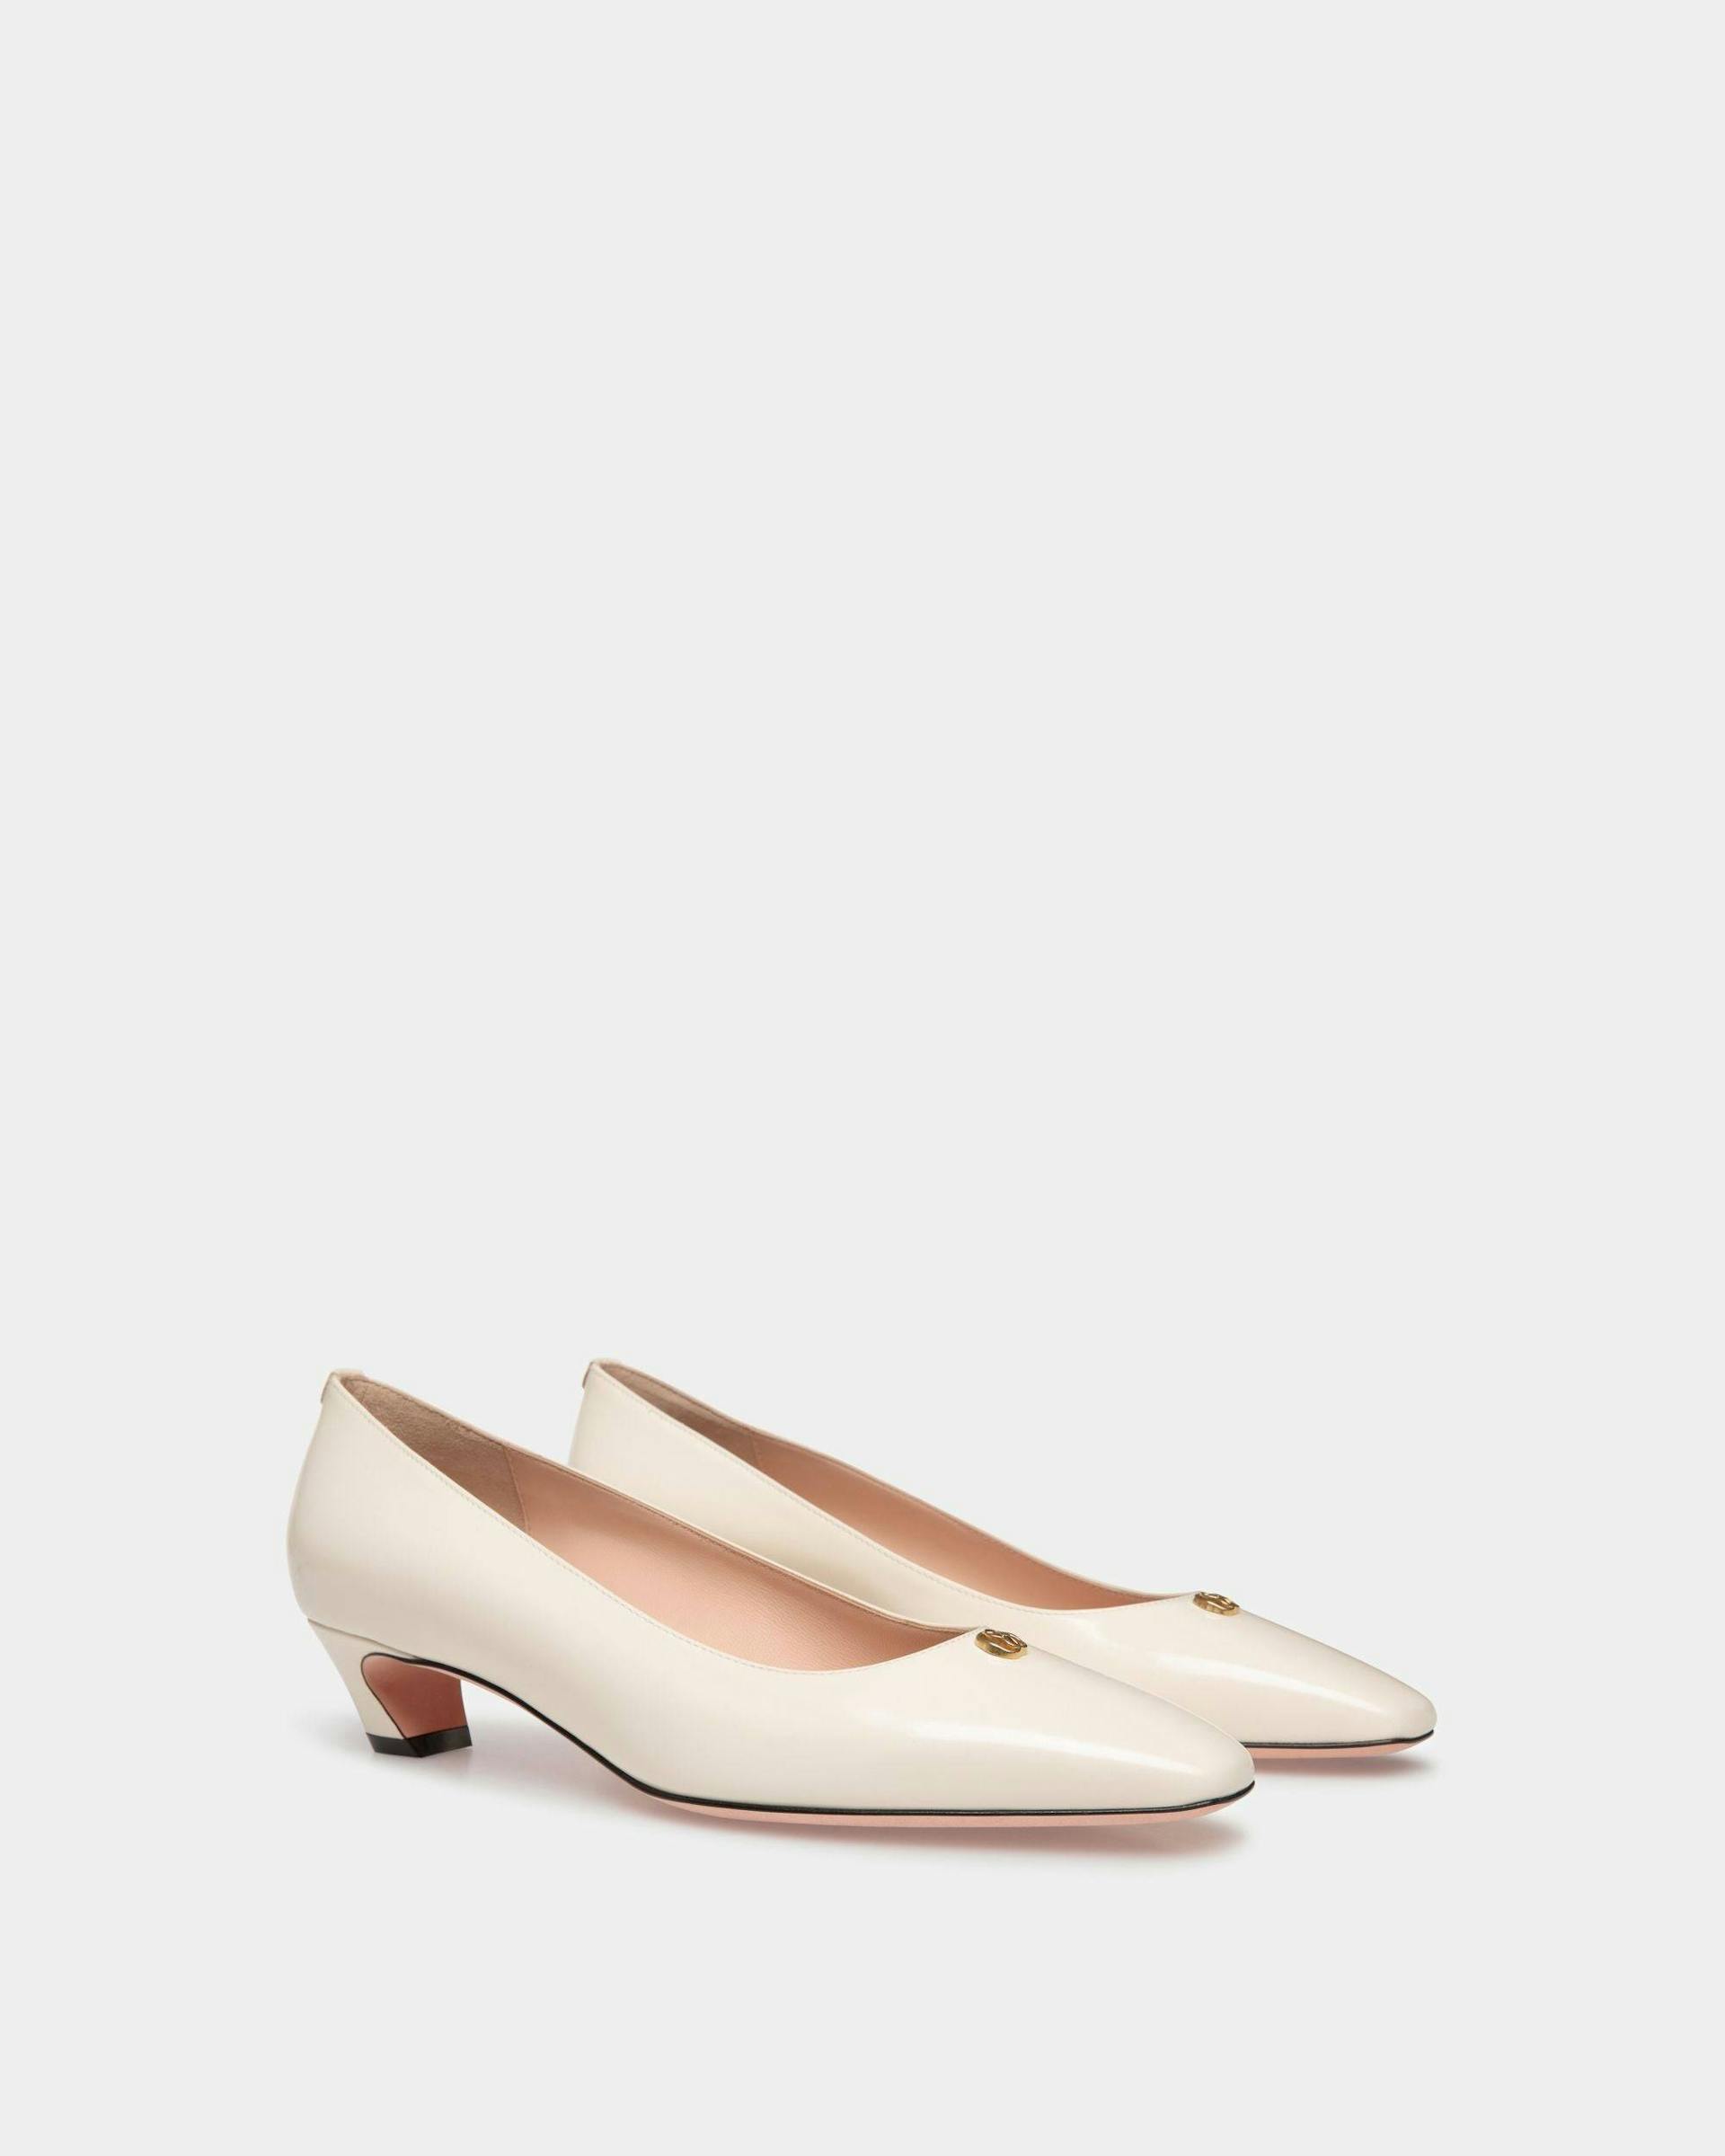 Women's Sylt Pump In White Leather | Bally | Still Life 3/4 Front